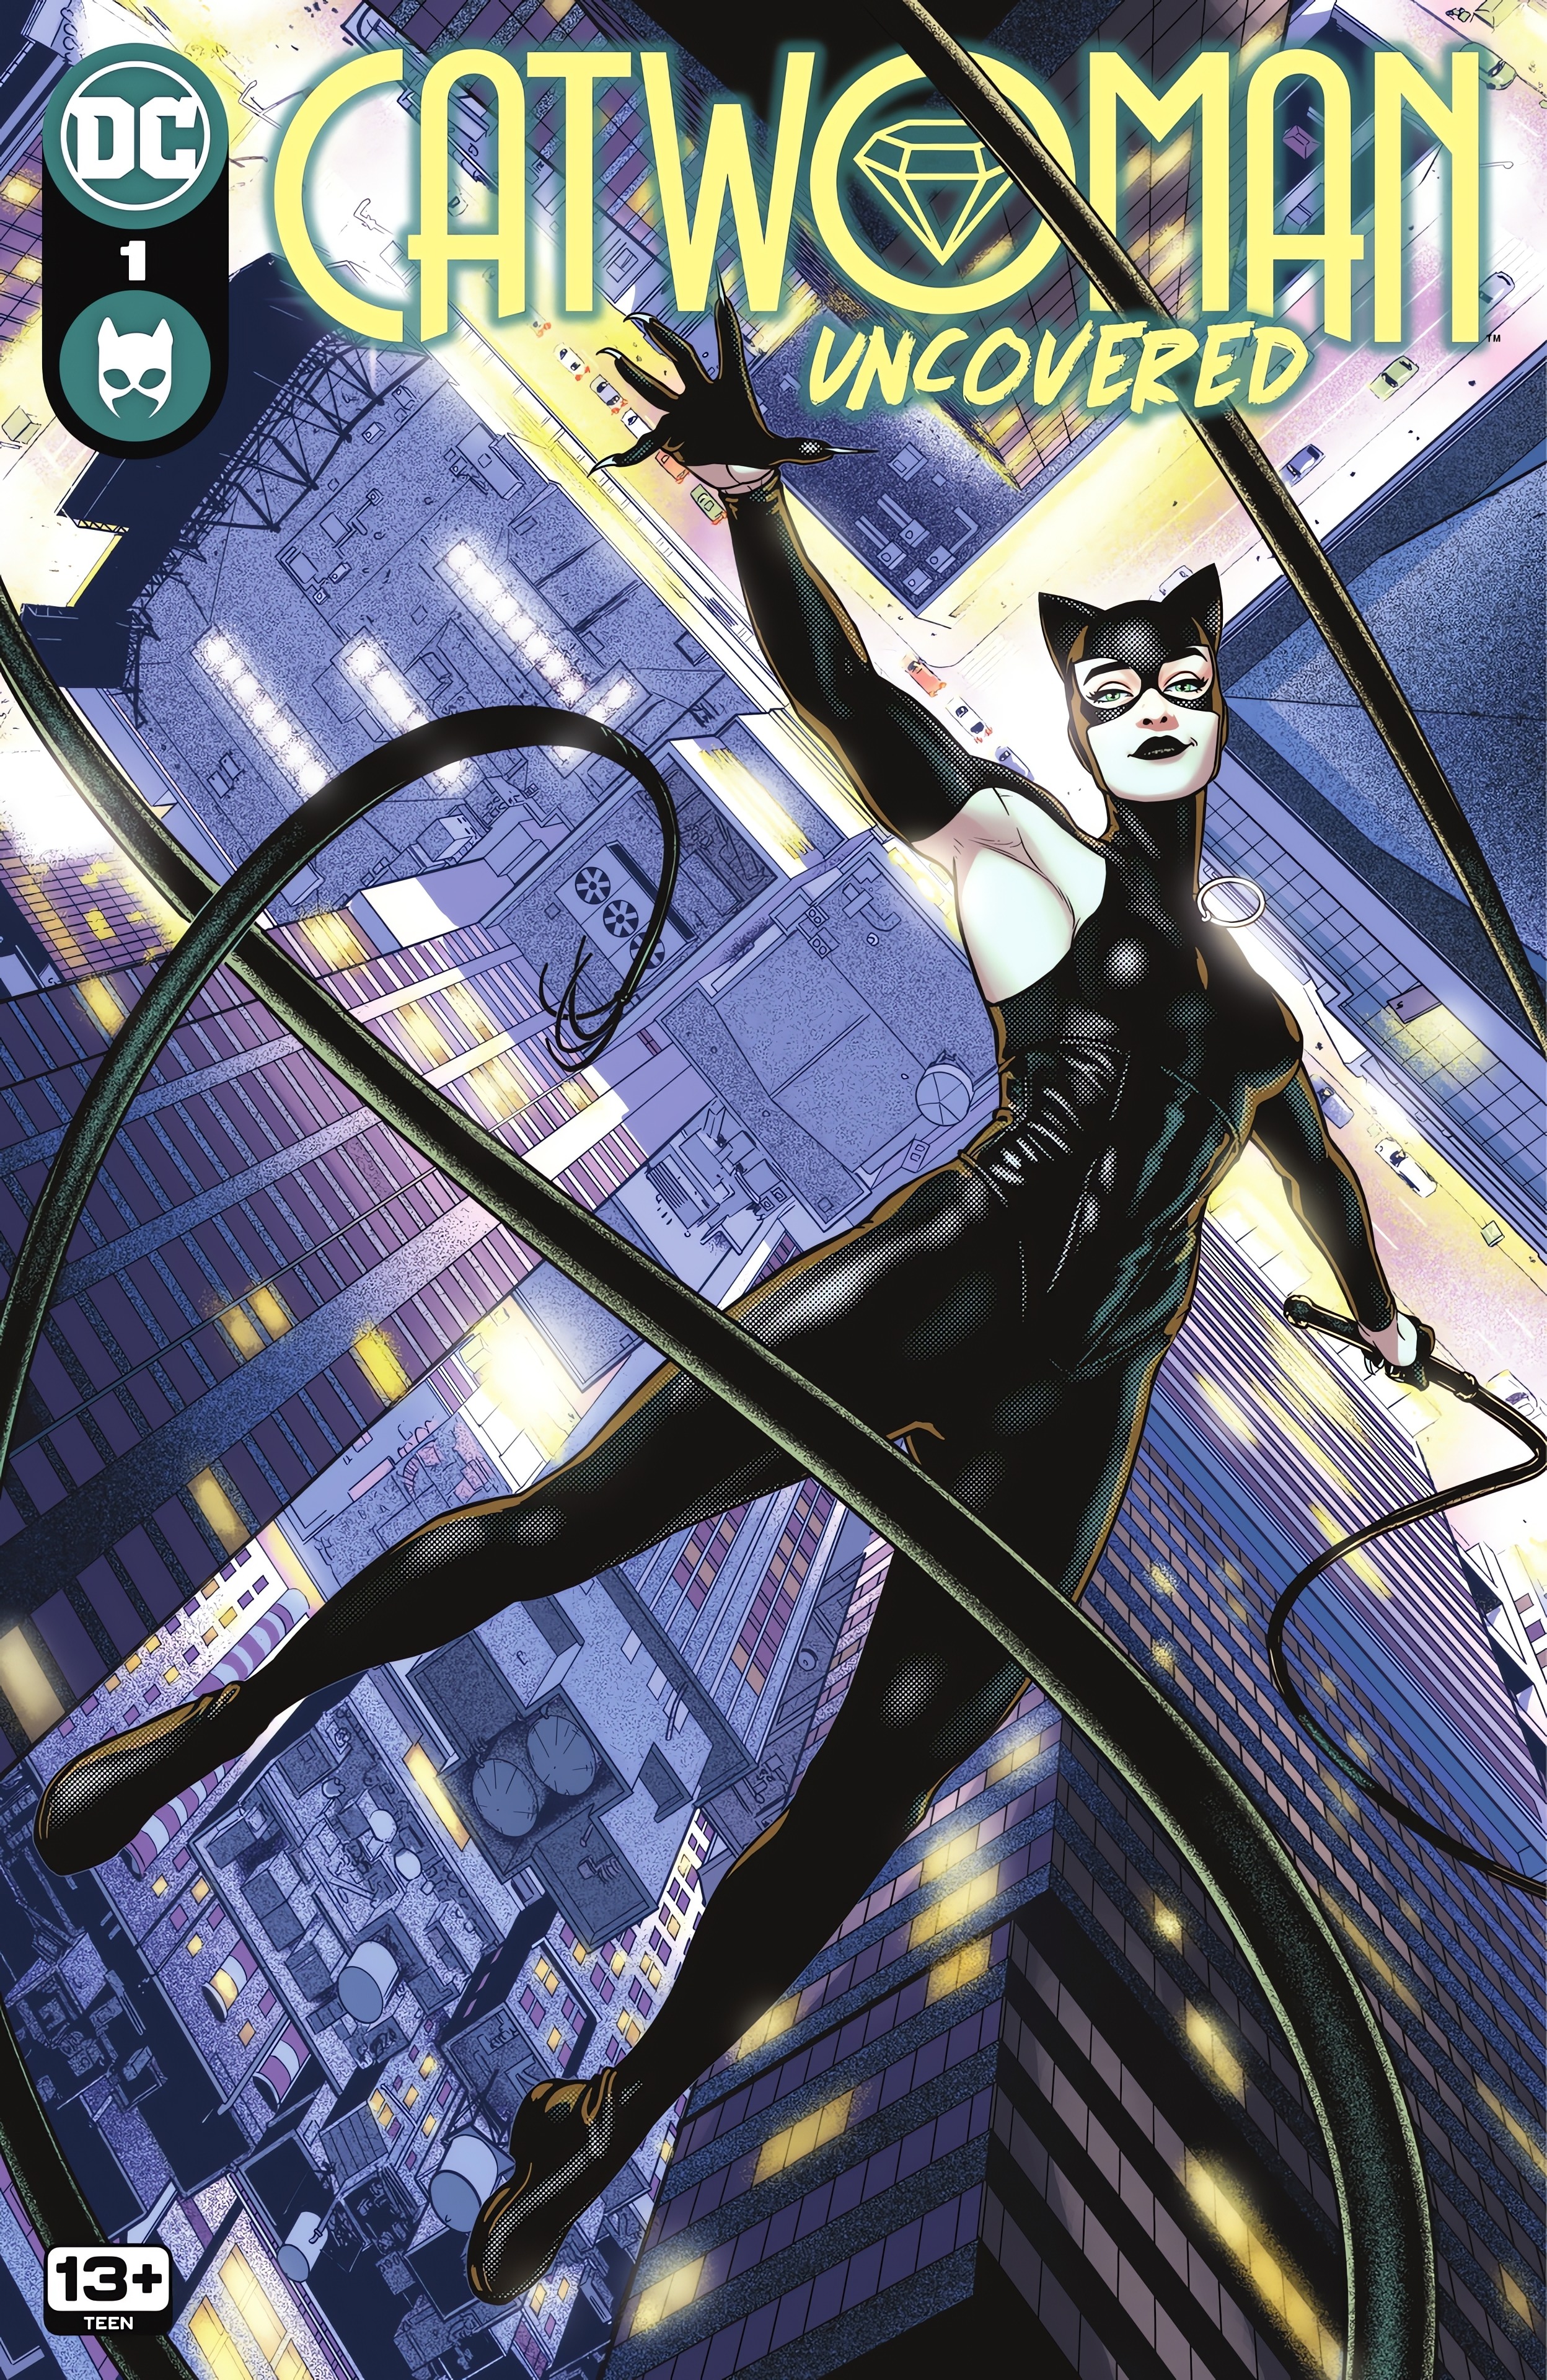 Read online Catwoman: Uncovered comic -  Issue #1 - 1